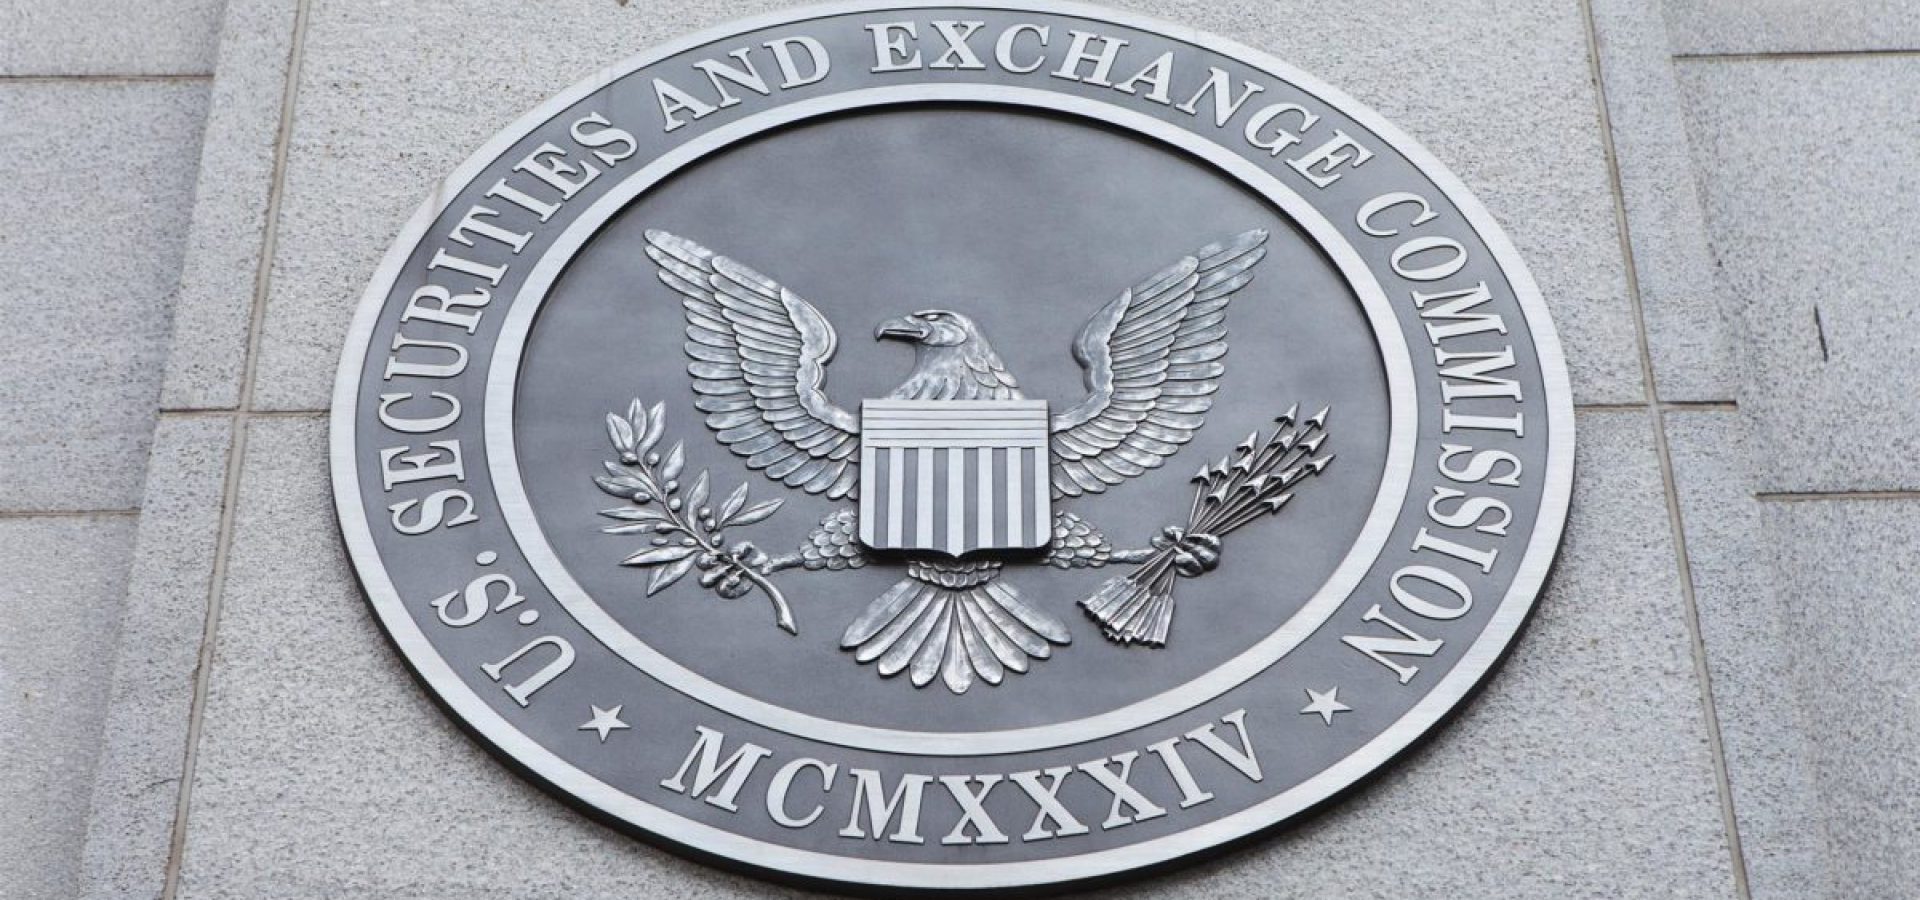 Securities Exchange Commission and a lawsuit